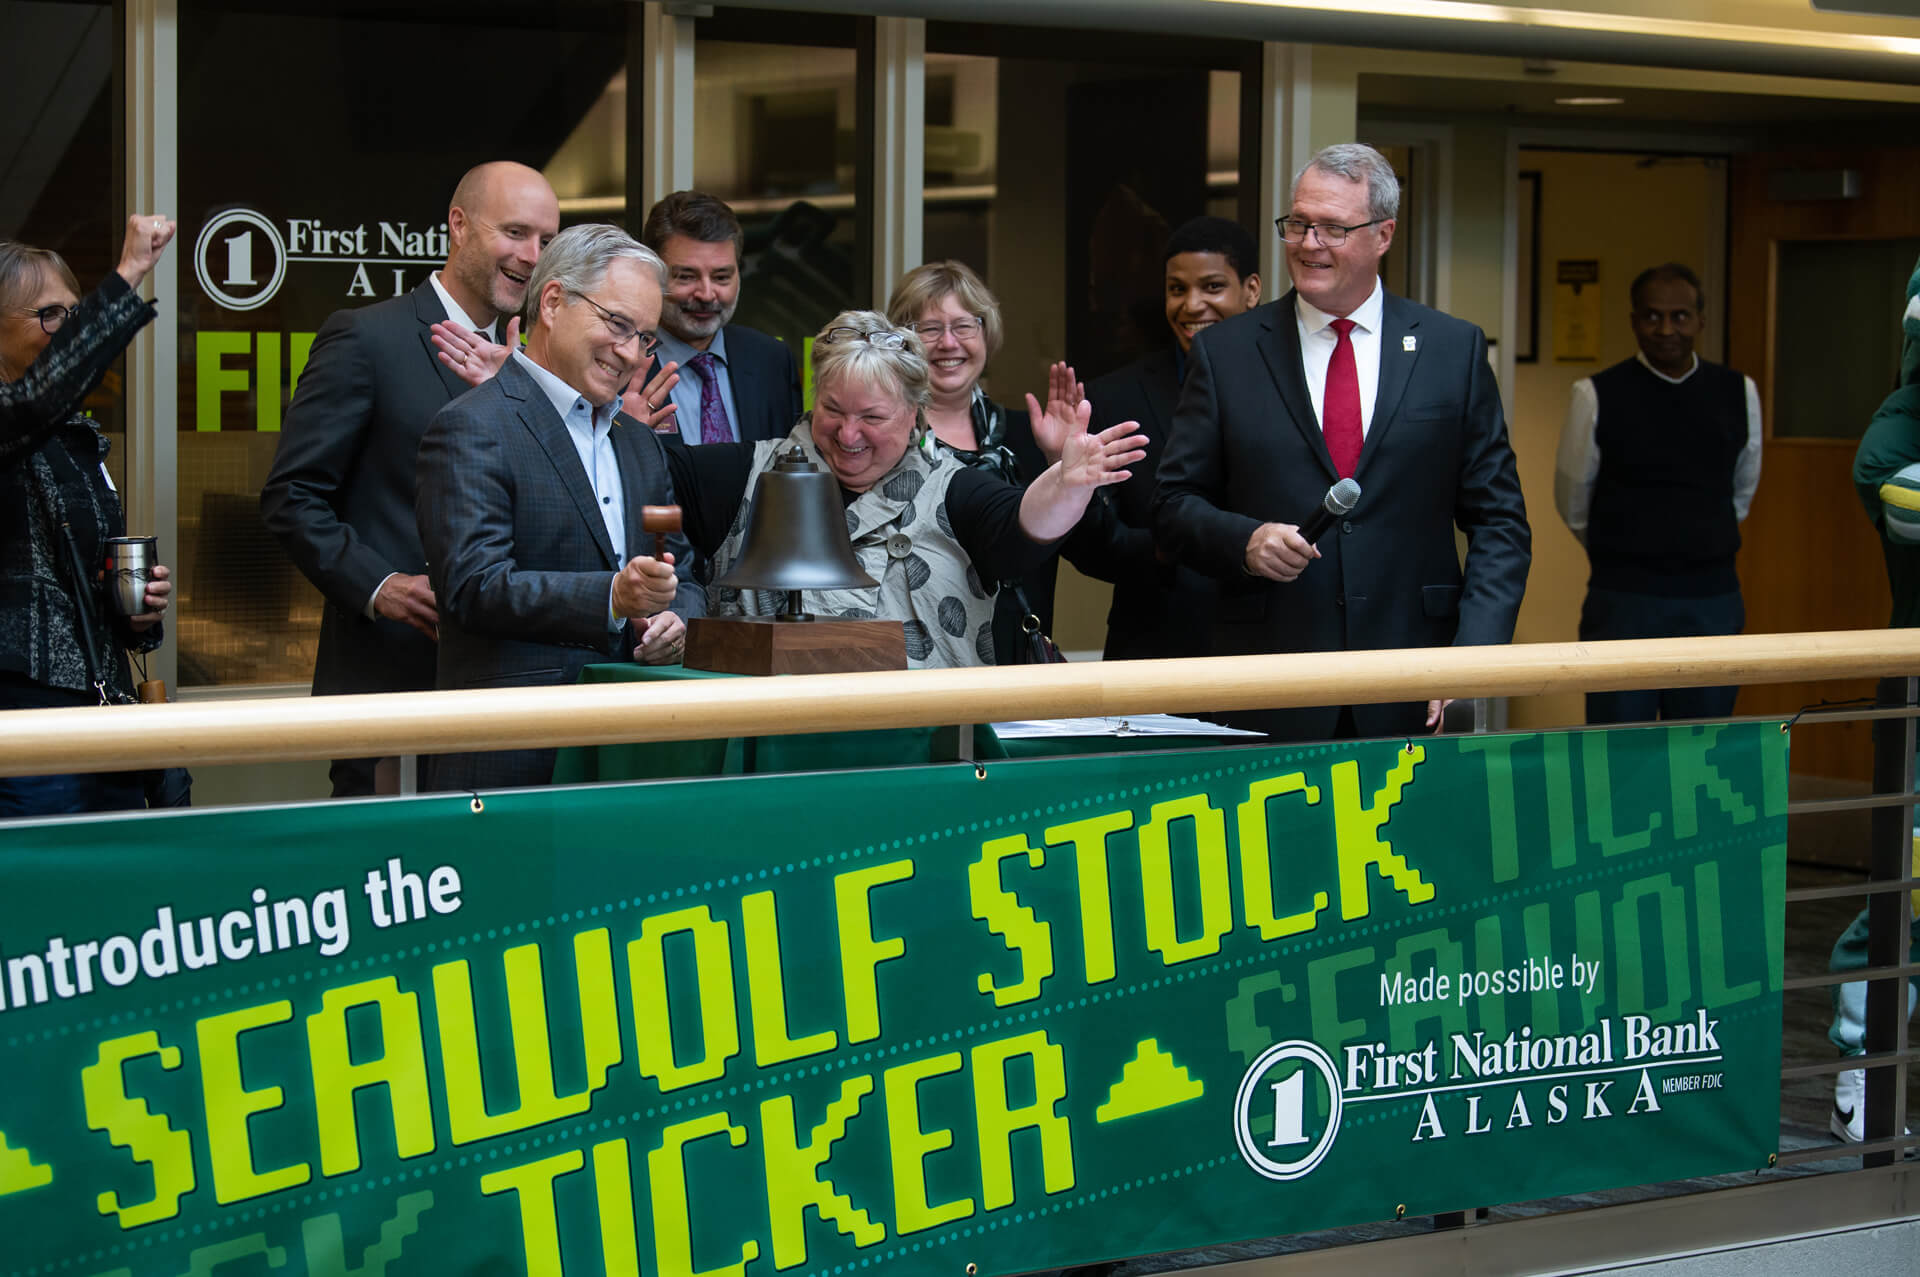 Chancellor Sean Parnell rings a bell to dedicate the new Seawolf Stock Ticker